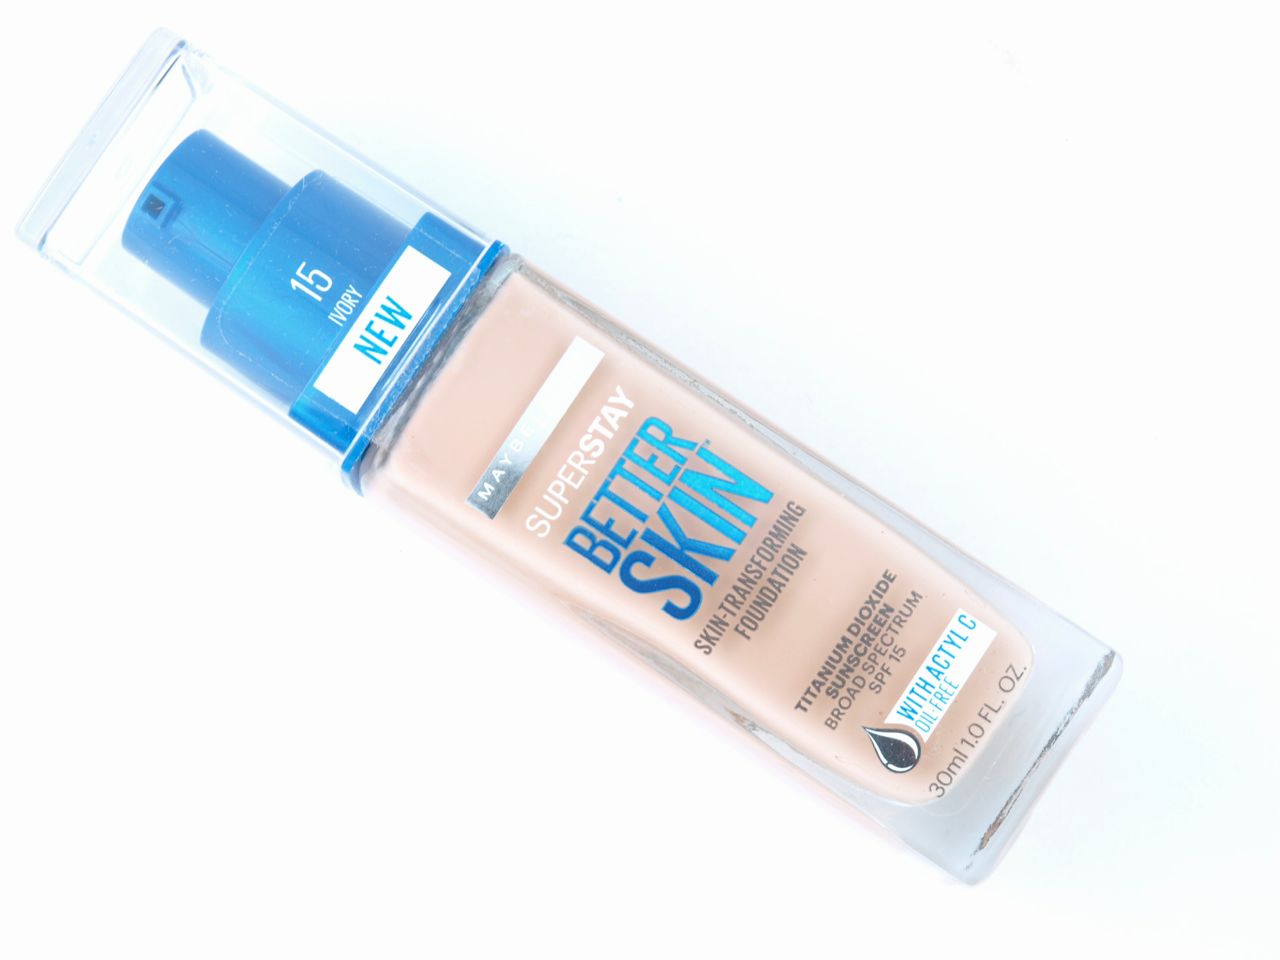 Maybelline SuperStay Better Skin Foundation in "15 Ivory": Review and Swatches